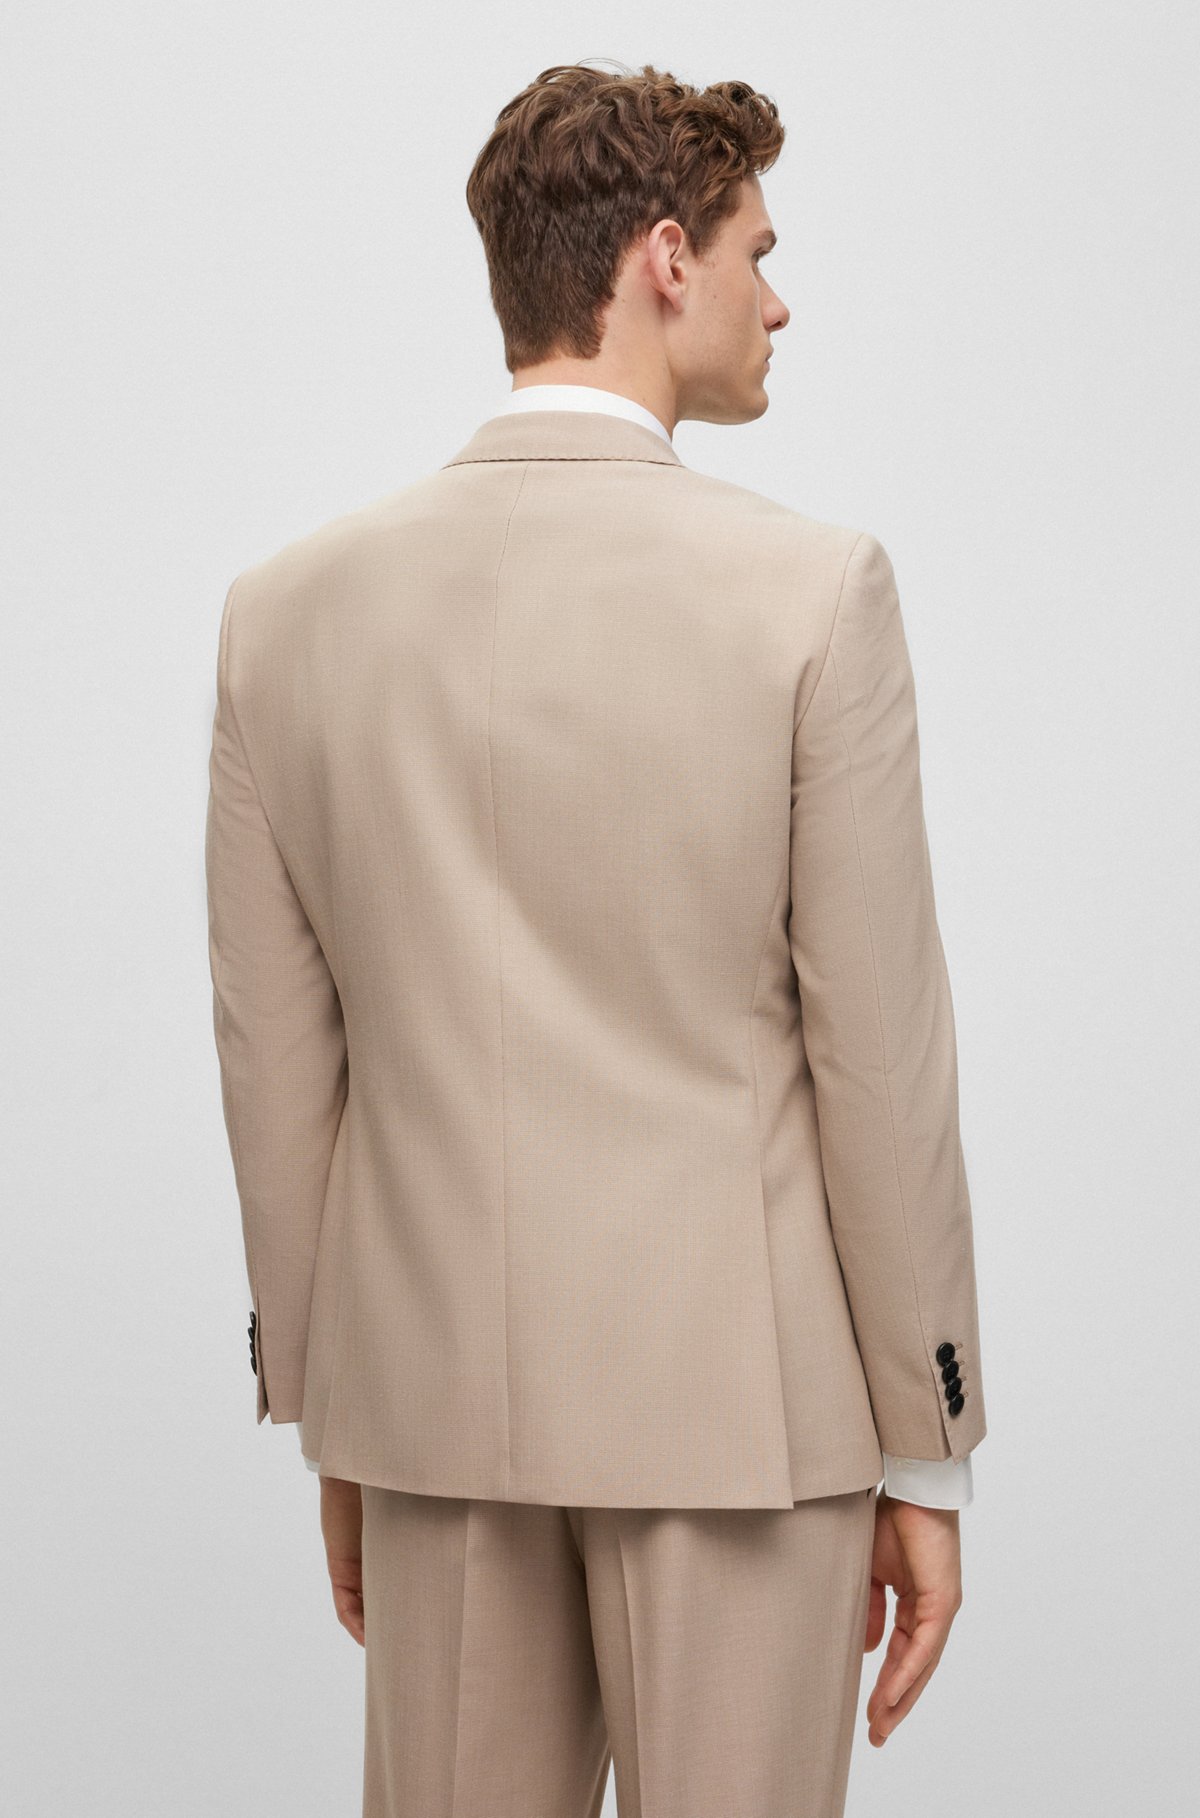 Regular-fit jacket in micro-patterned stretch cloth, Beige